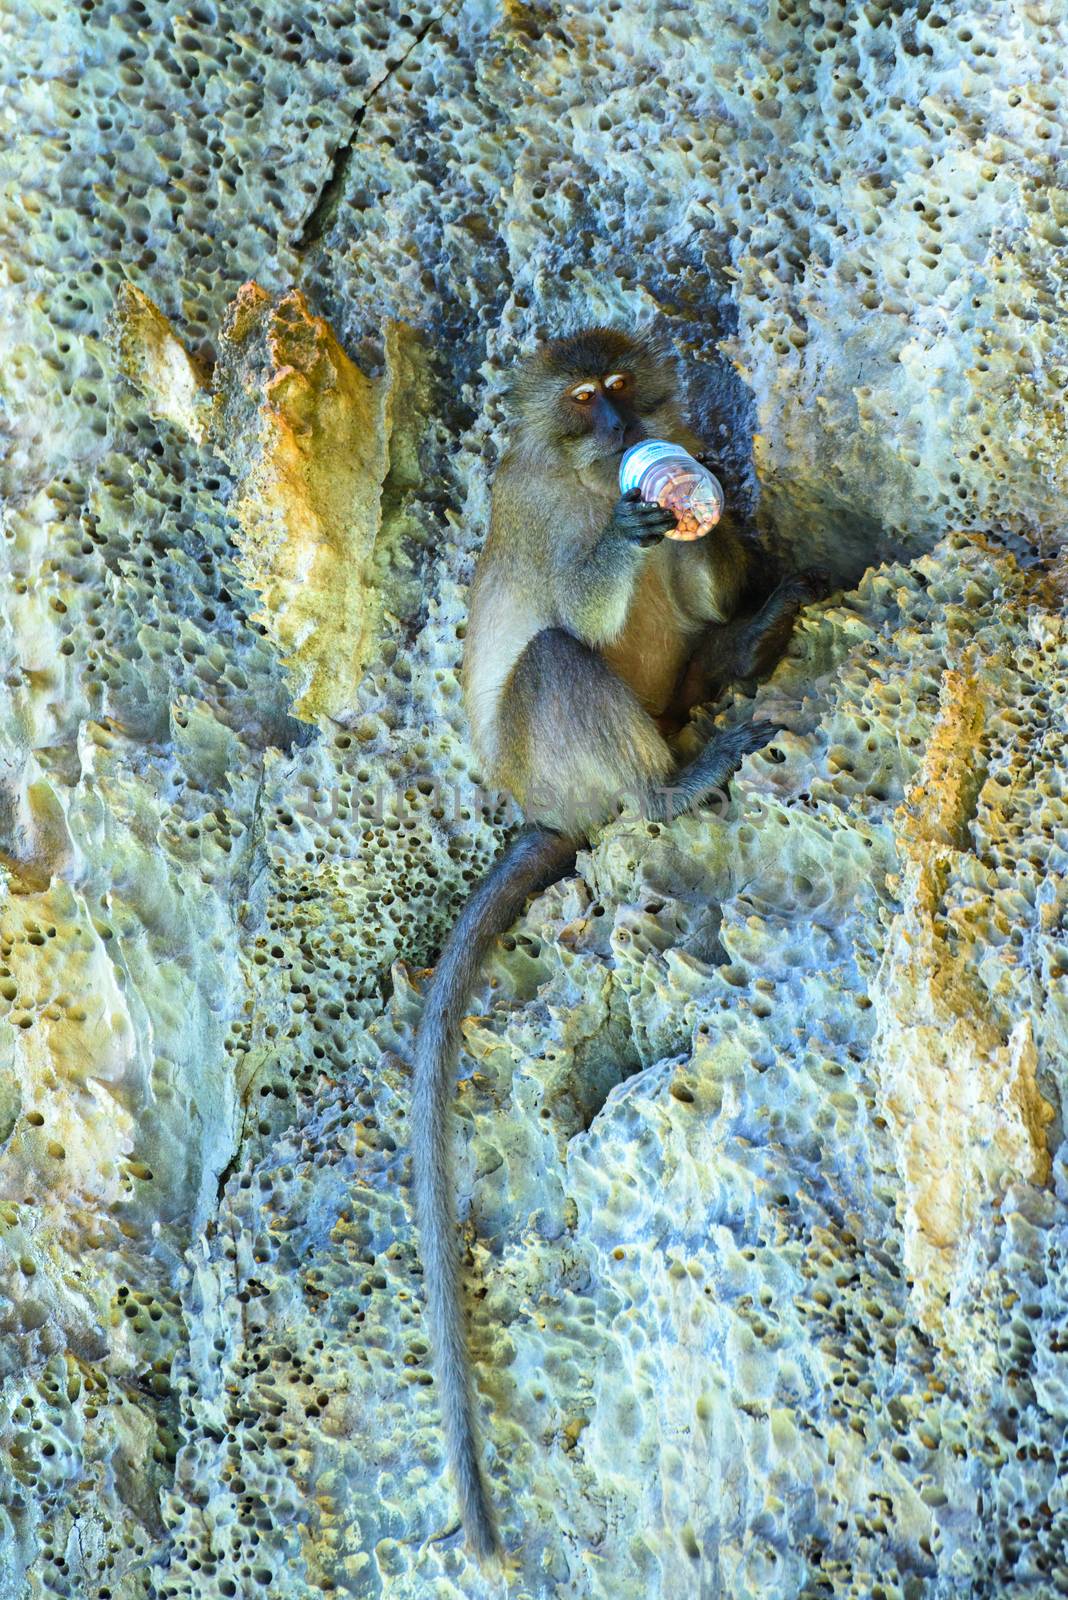 Macaque is eating, Monkey beach, Phi Phi Don island, Andaman sea by Eagle2308